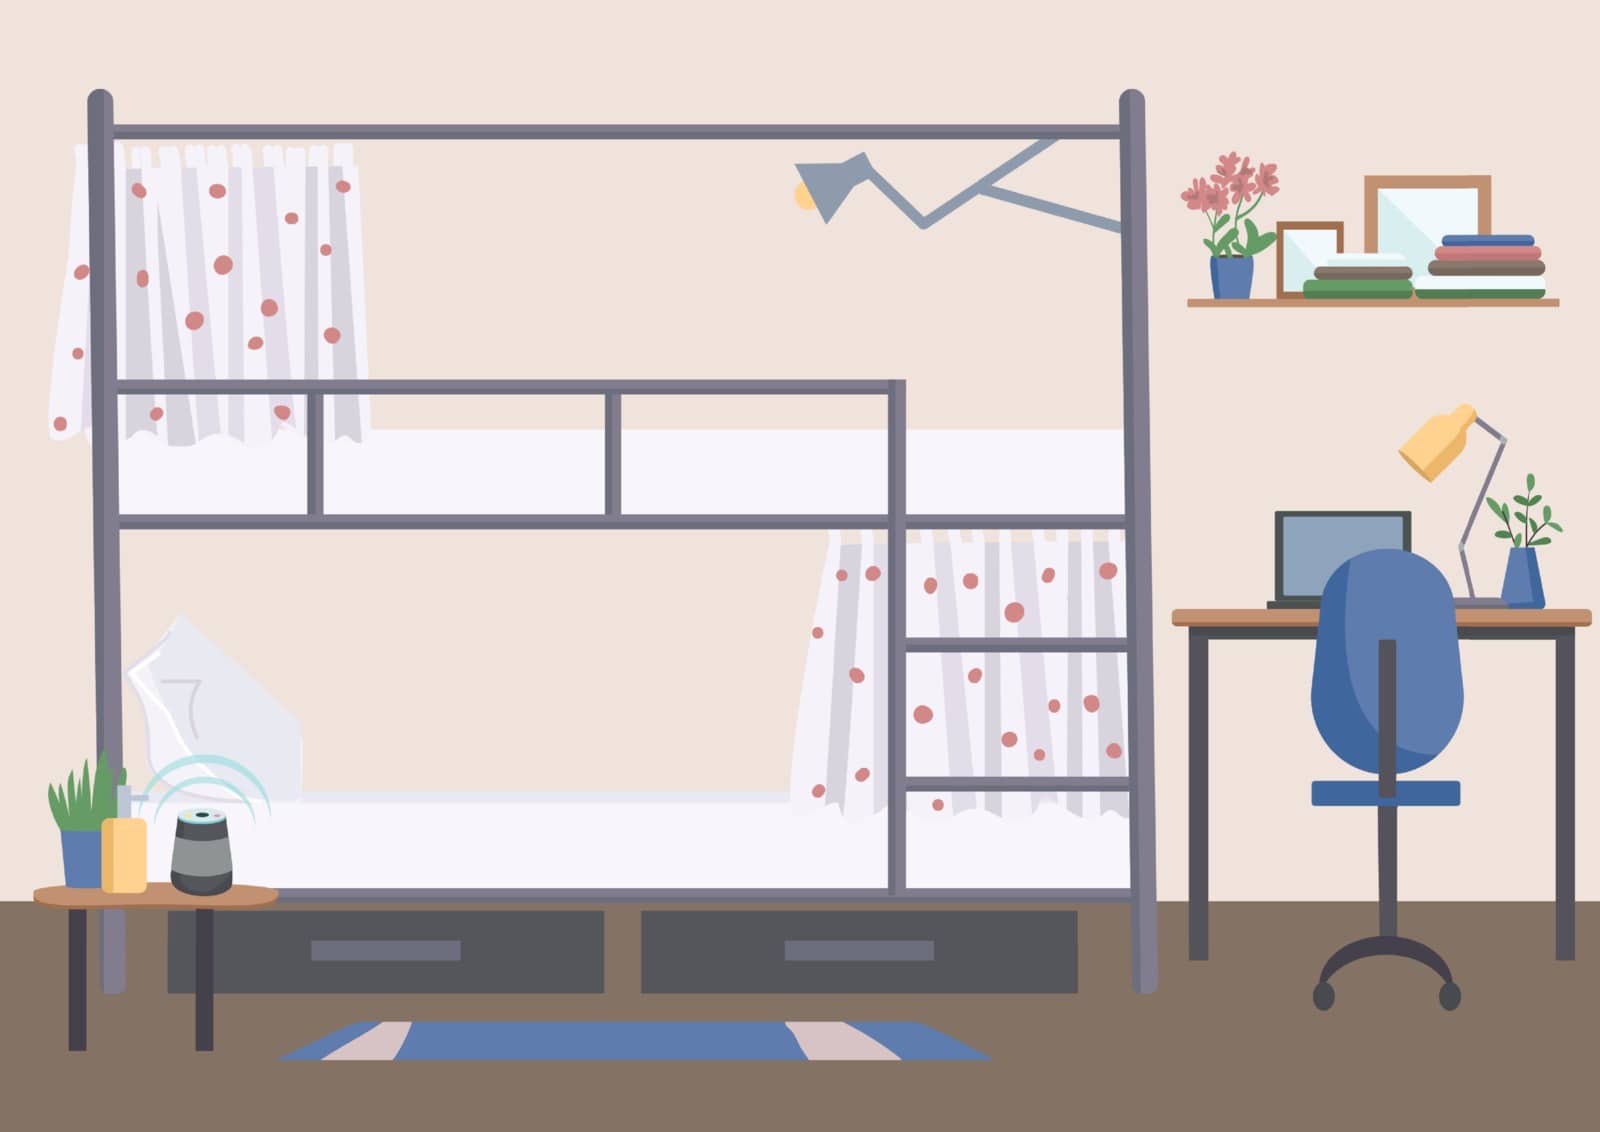 Hostel, dorm room flat color vector illustration. University dormitory, accommodation 2D cartoon interior with bunk bed on background. Student lifestyle, college experience. Empty shared room by ntl